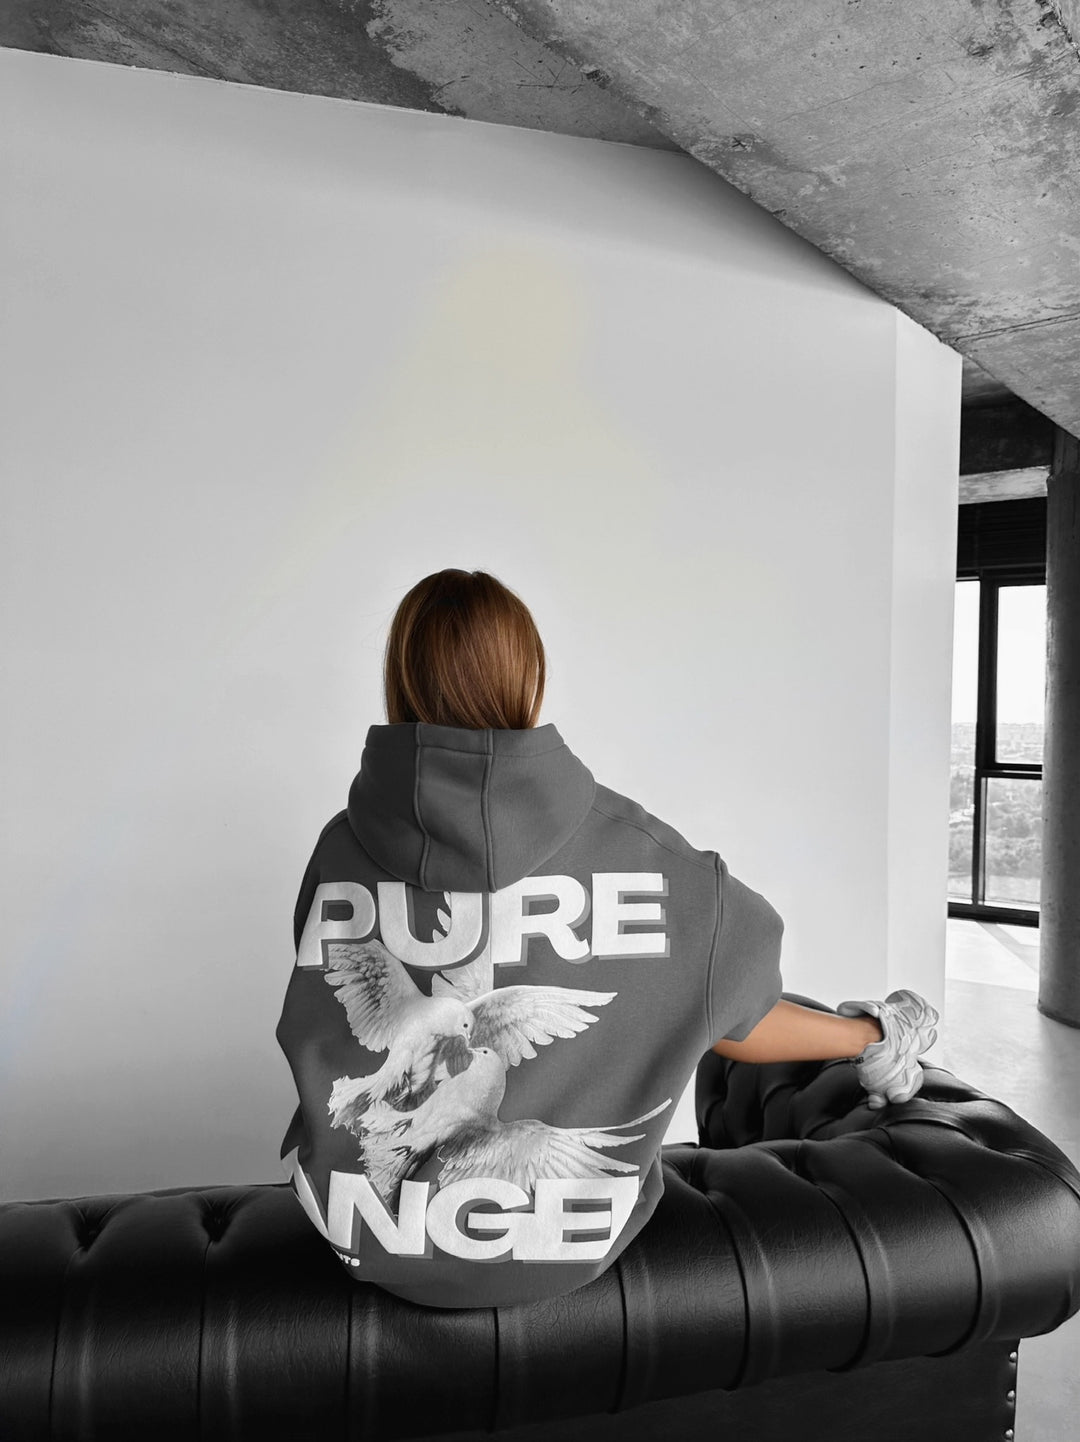 Oversize Pure Angel Hoodie - Anthracite